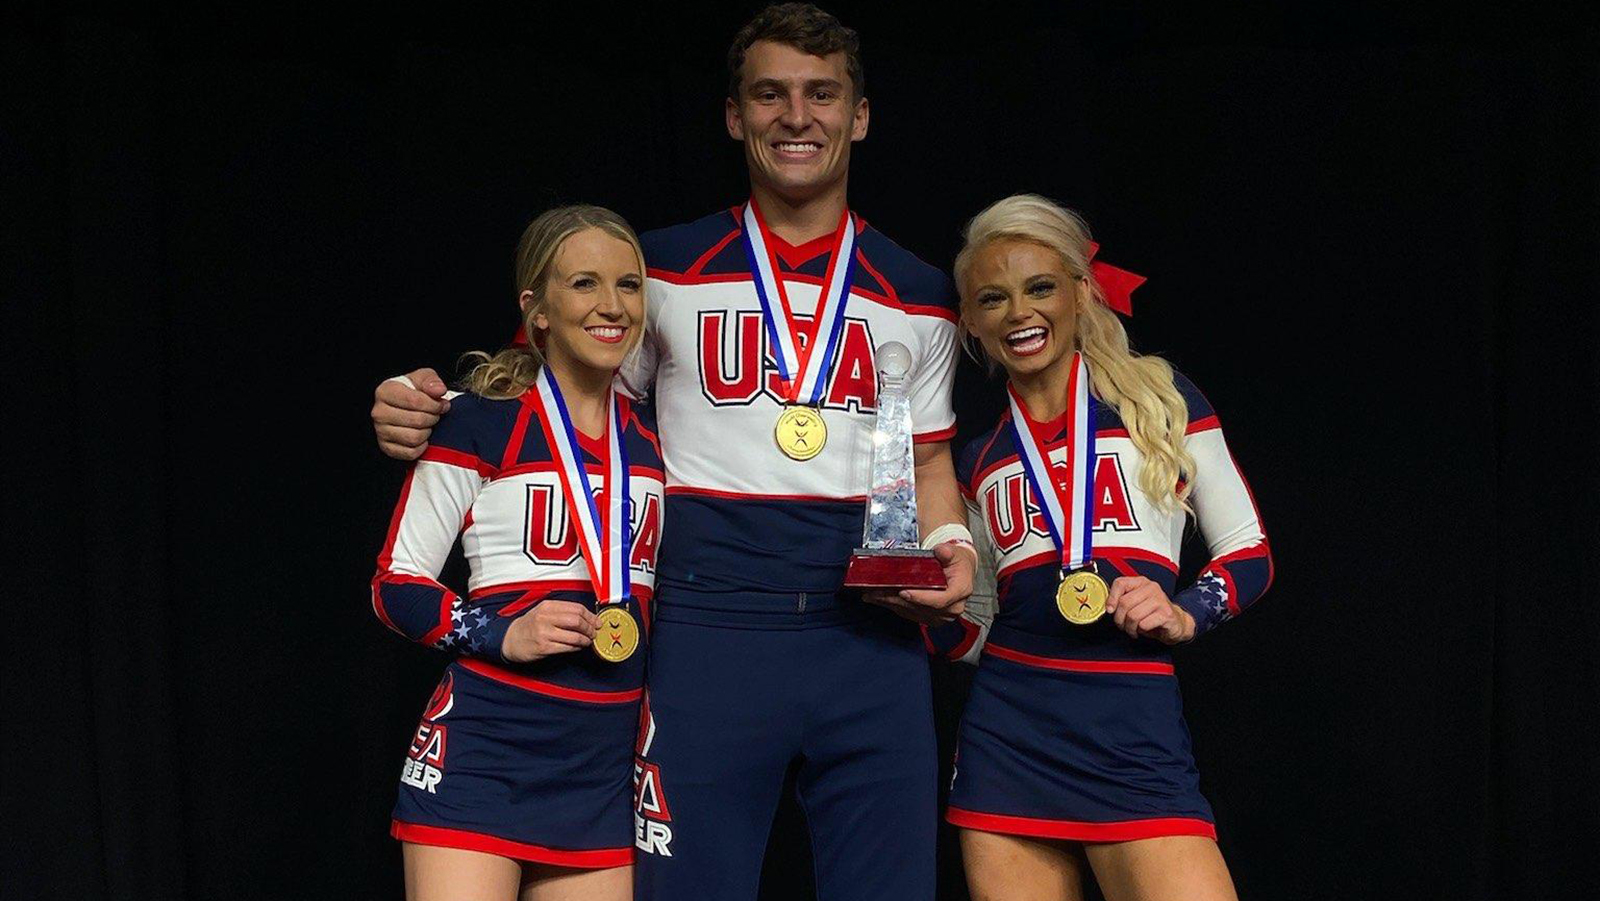 Two Current UK Cheerleaders Win Gold at ICU World Championships